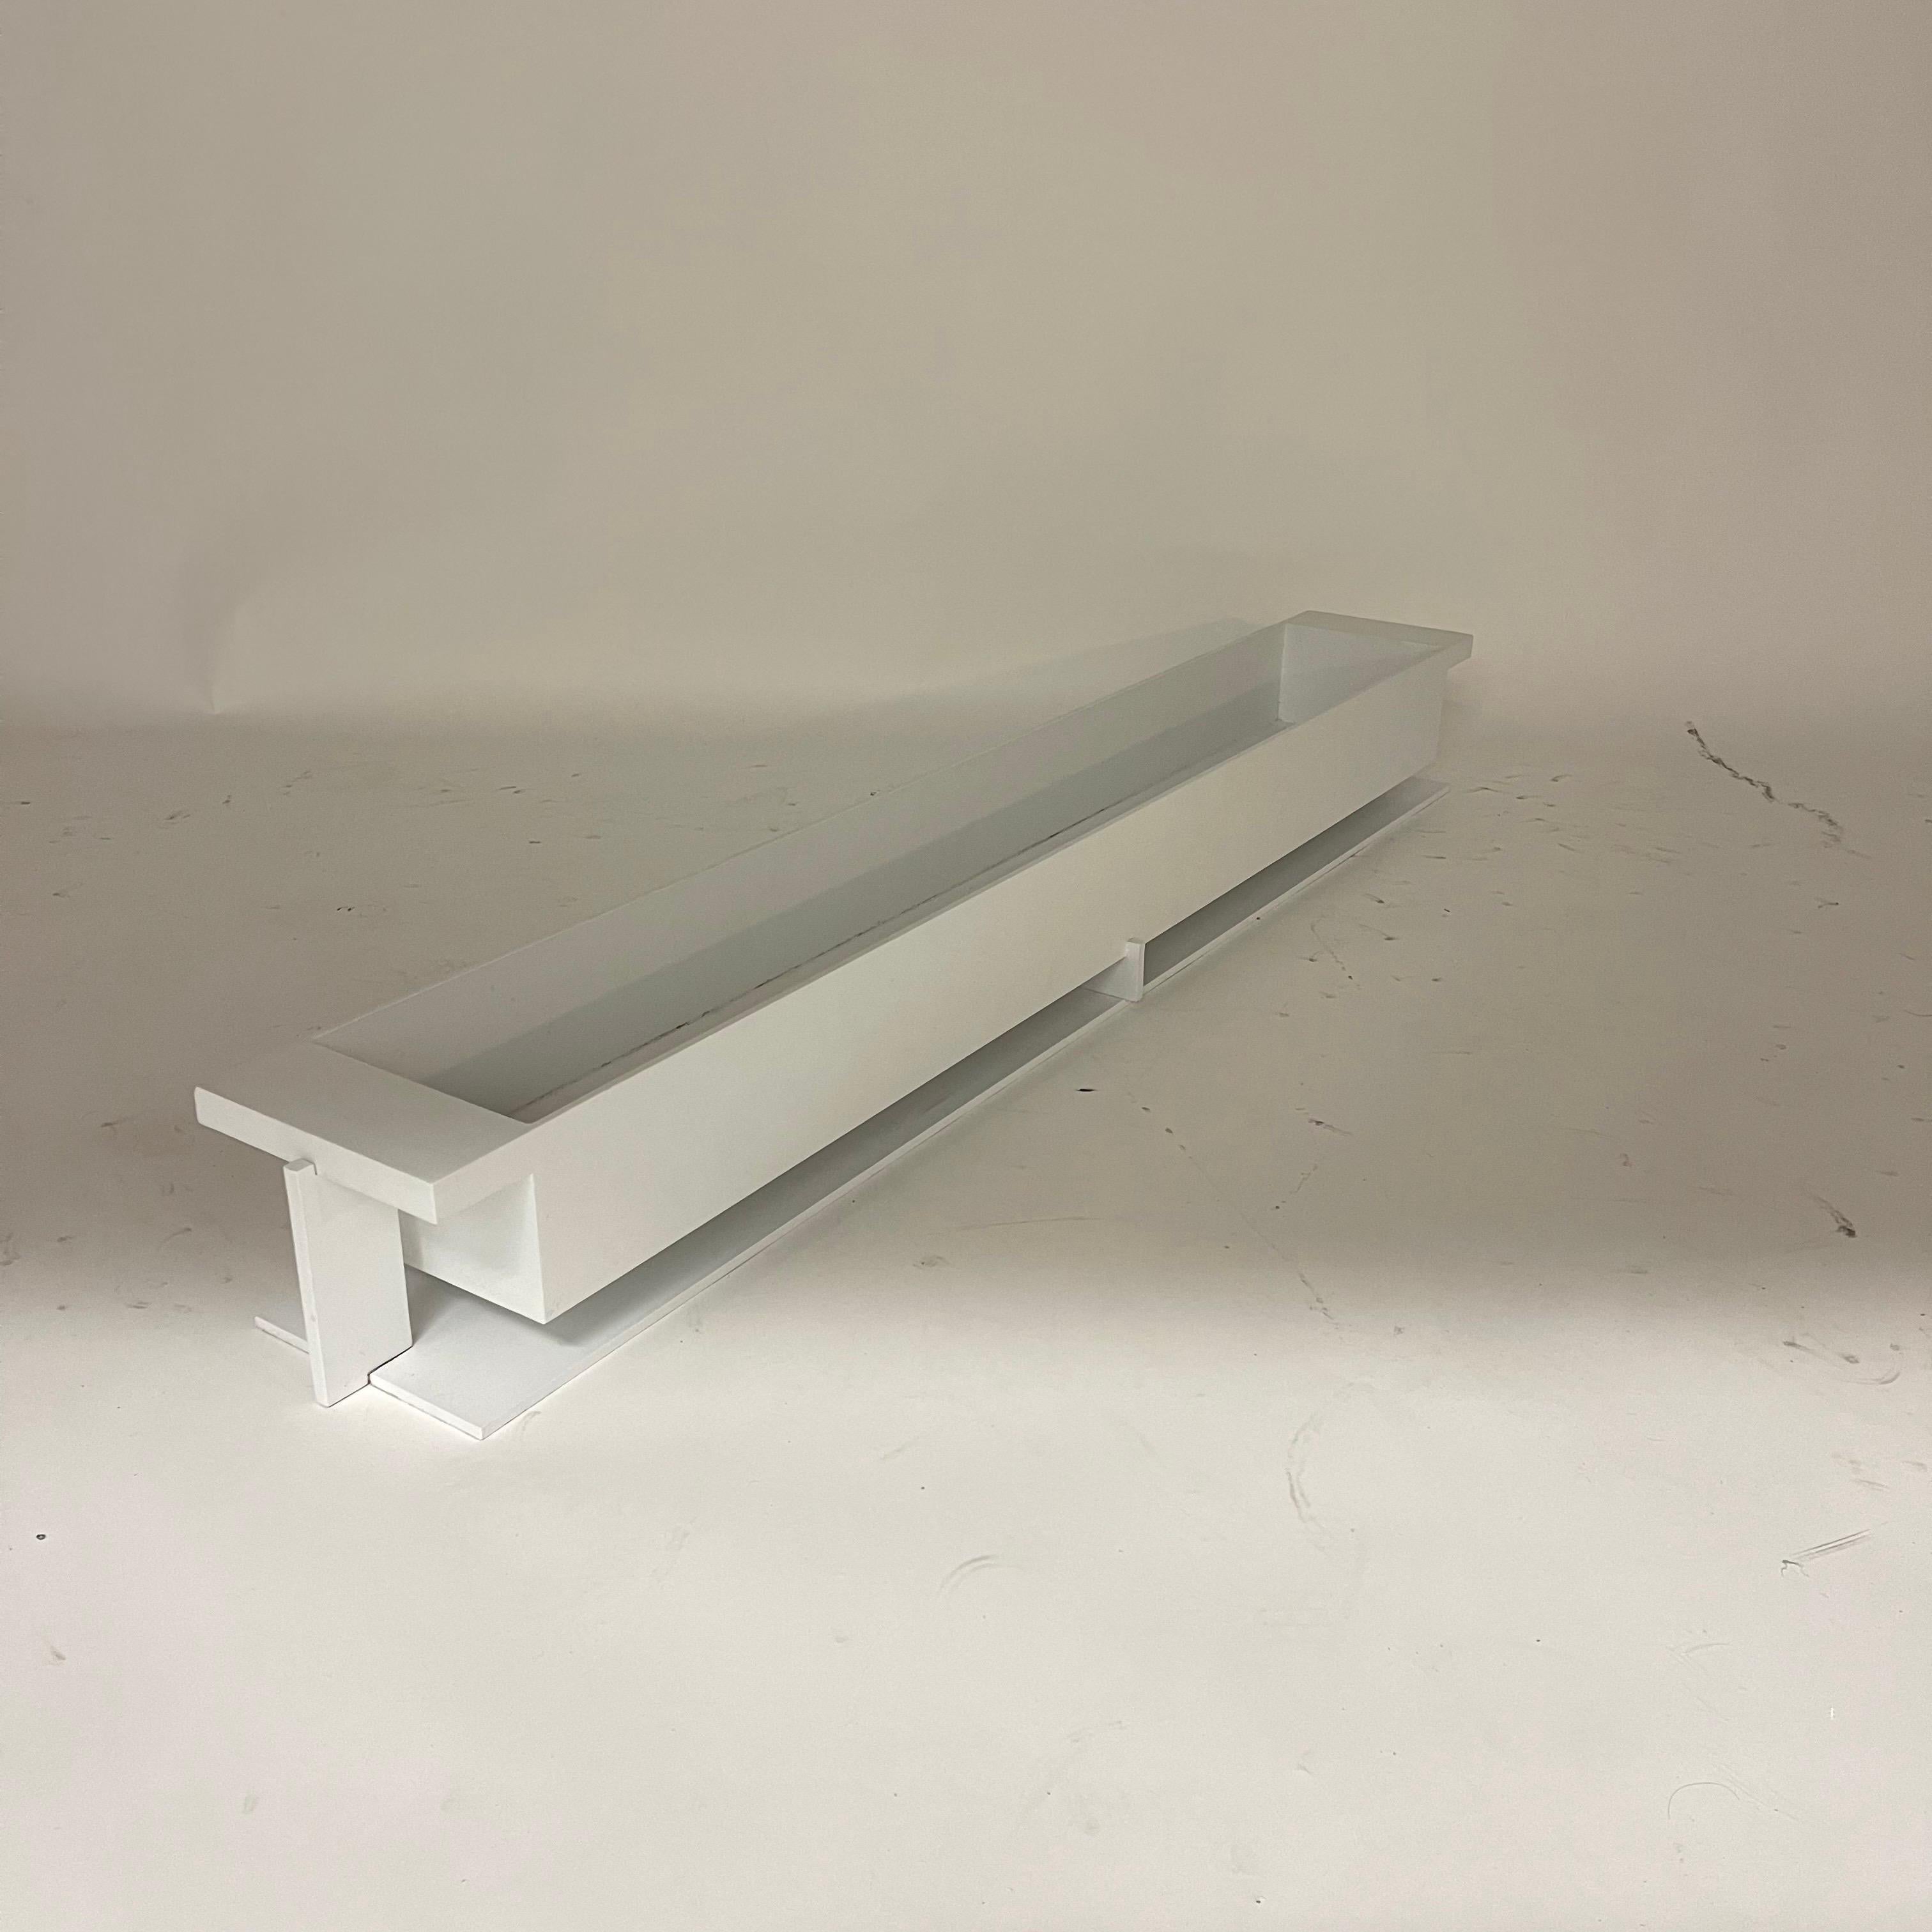 Frank Lloyd Wright Style Modernist White Powder Coated Cold Steel Planter, USA In Good Condition For Sale In Miami, FL